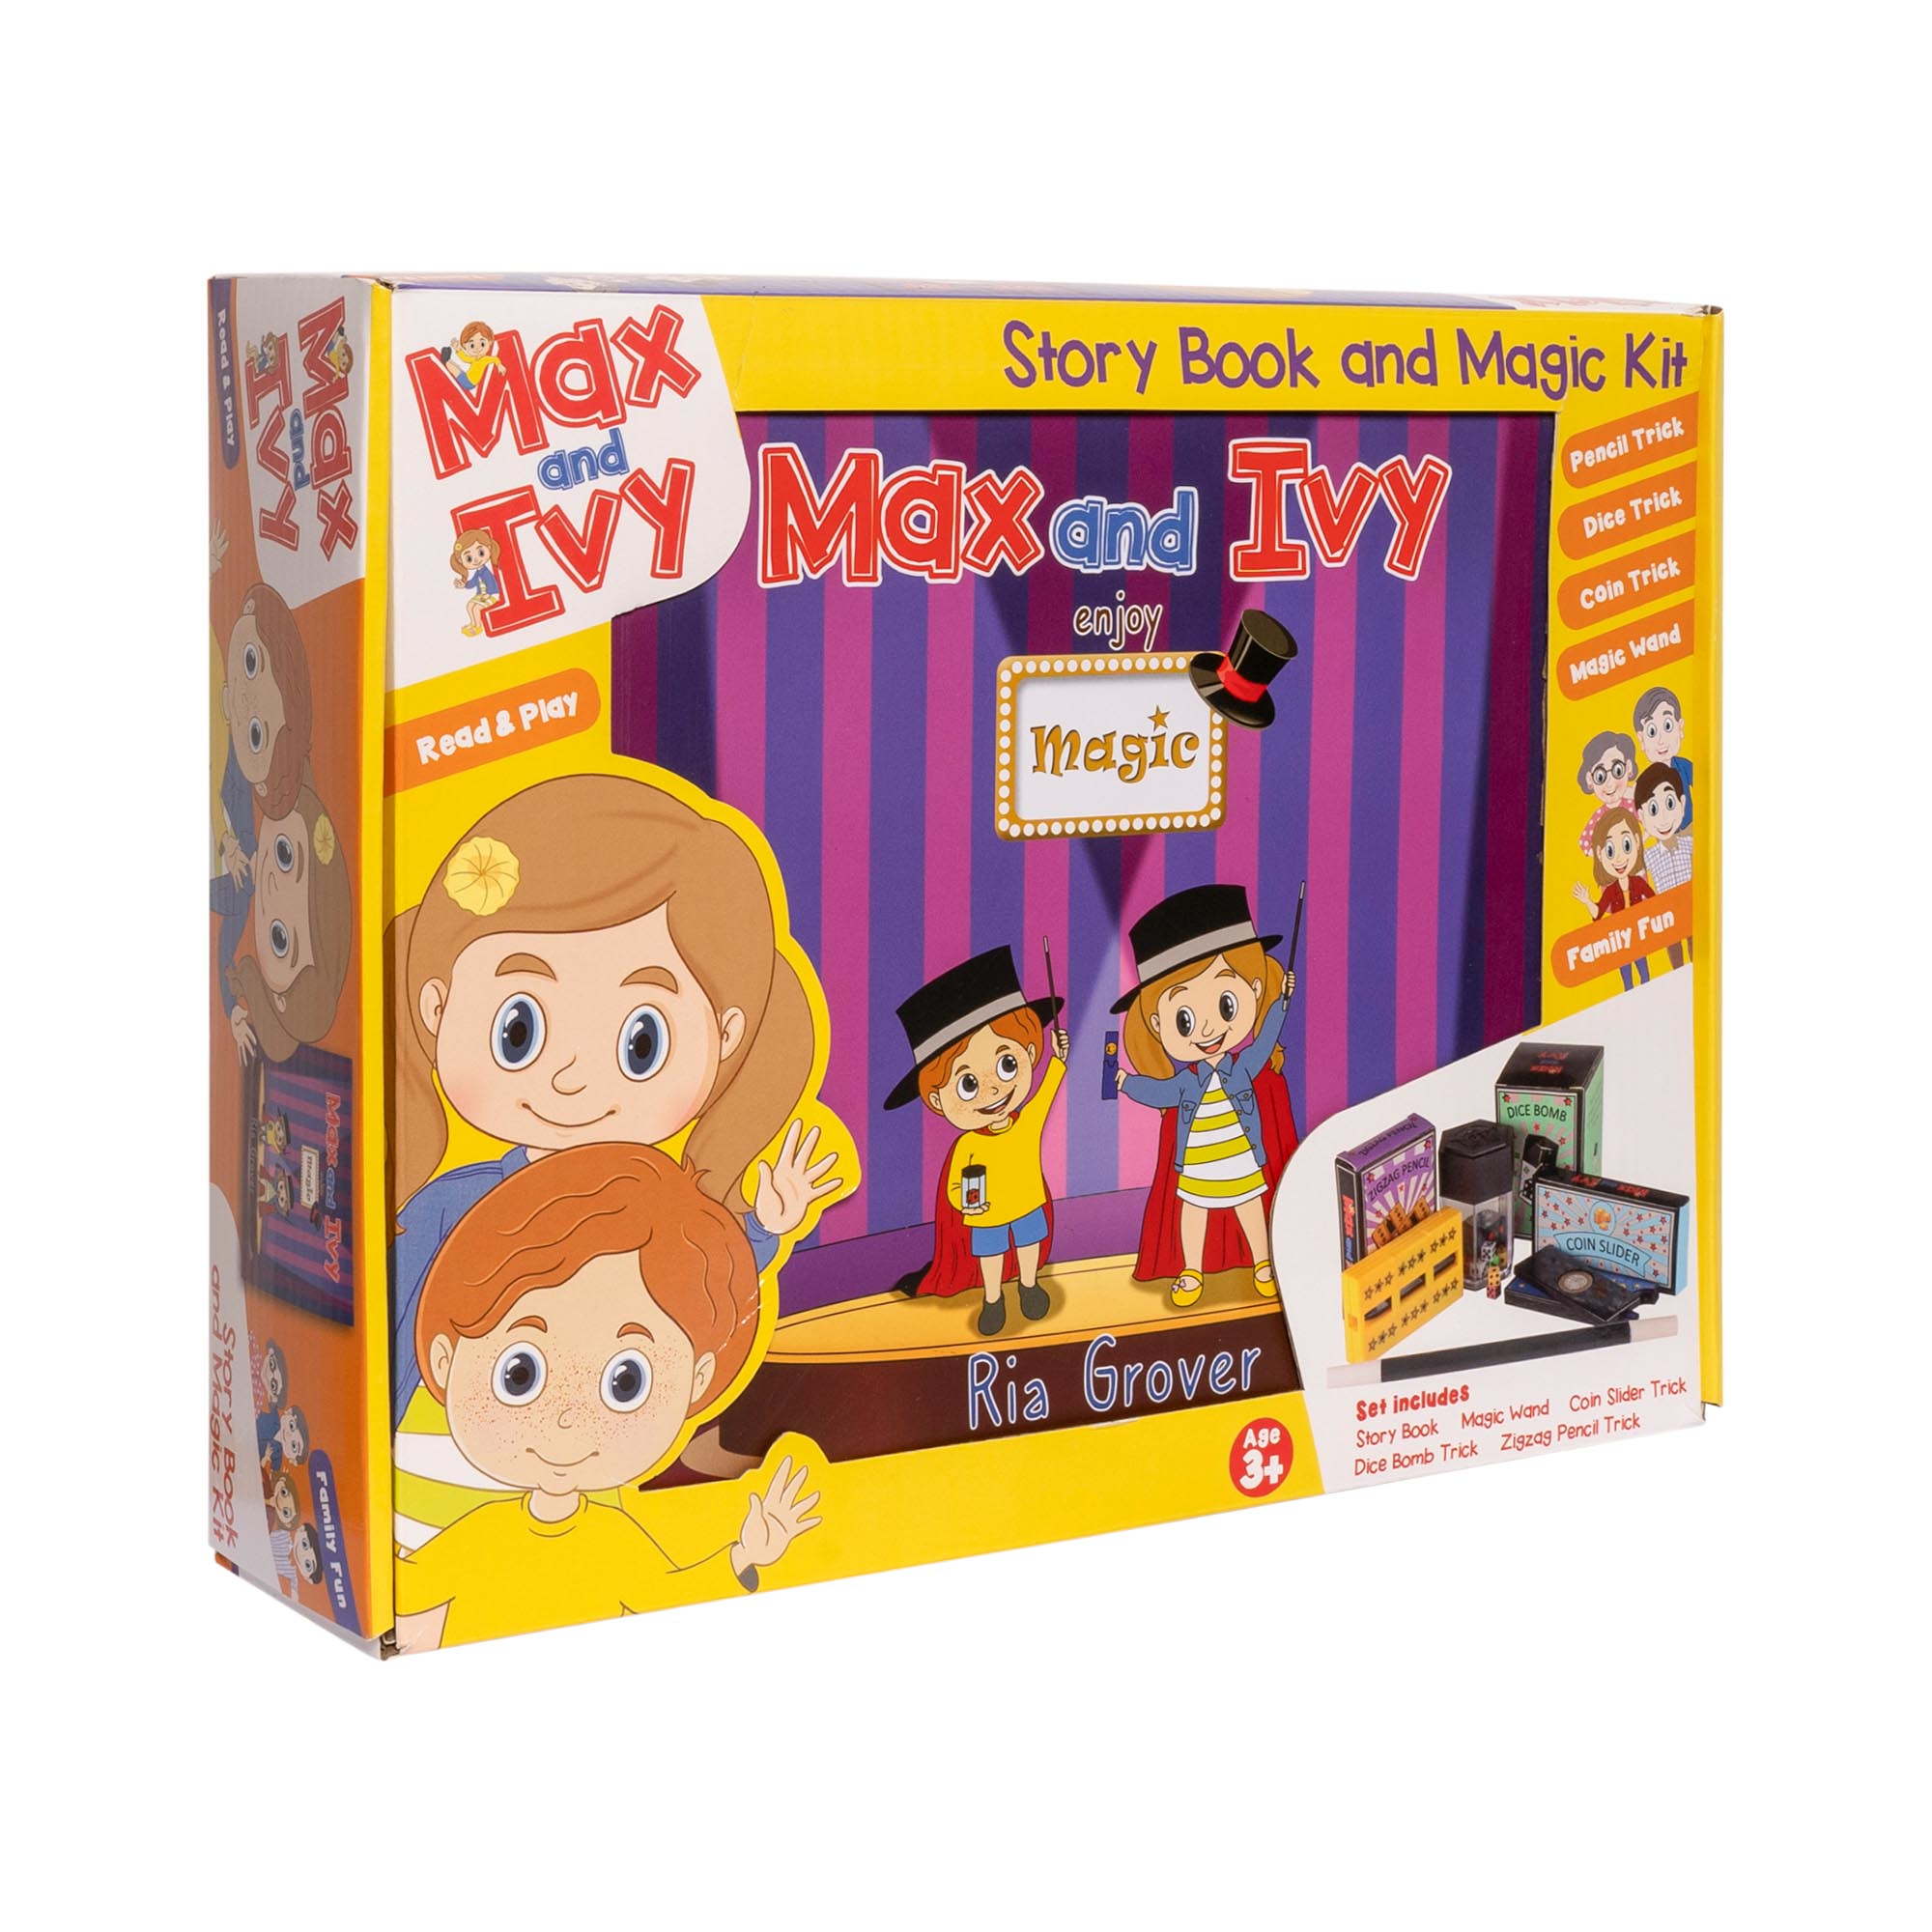 Max and Ivy ‘Read and Play’ Box, worth £19.99